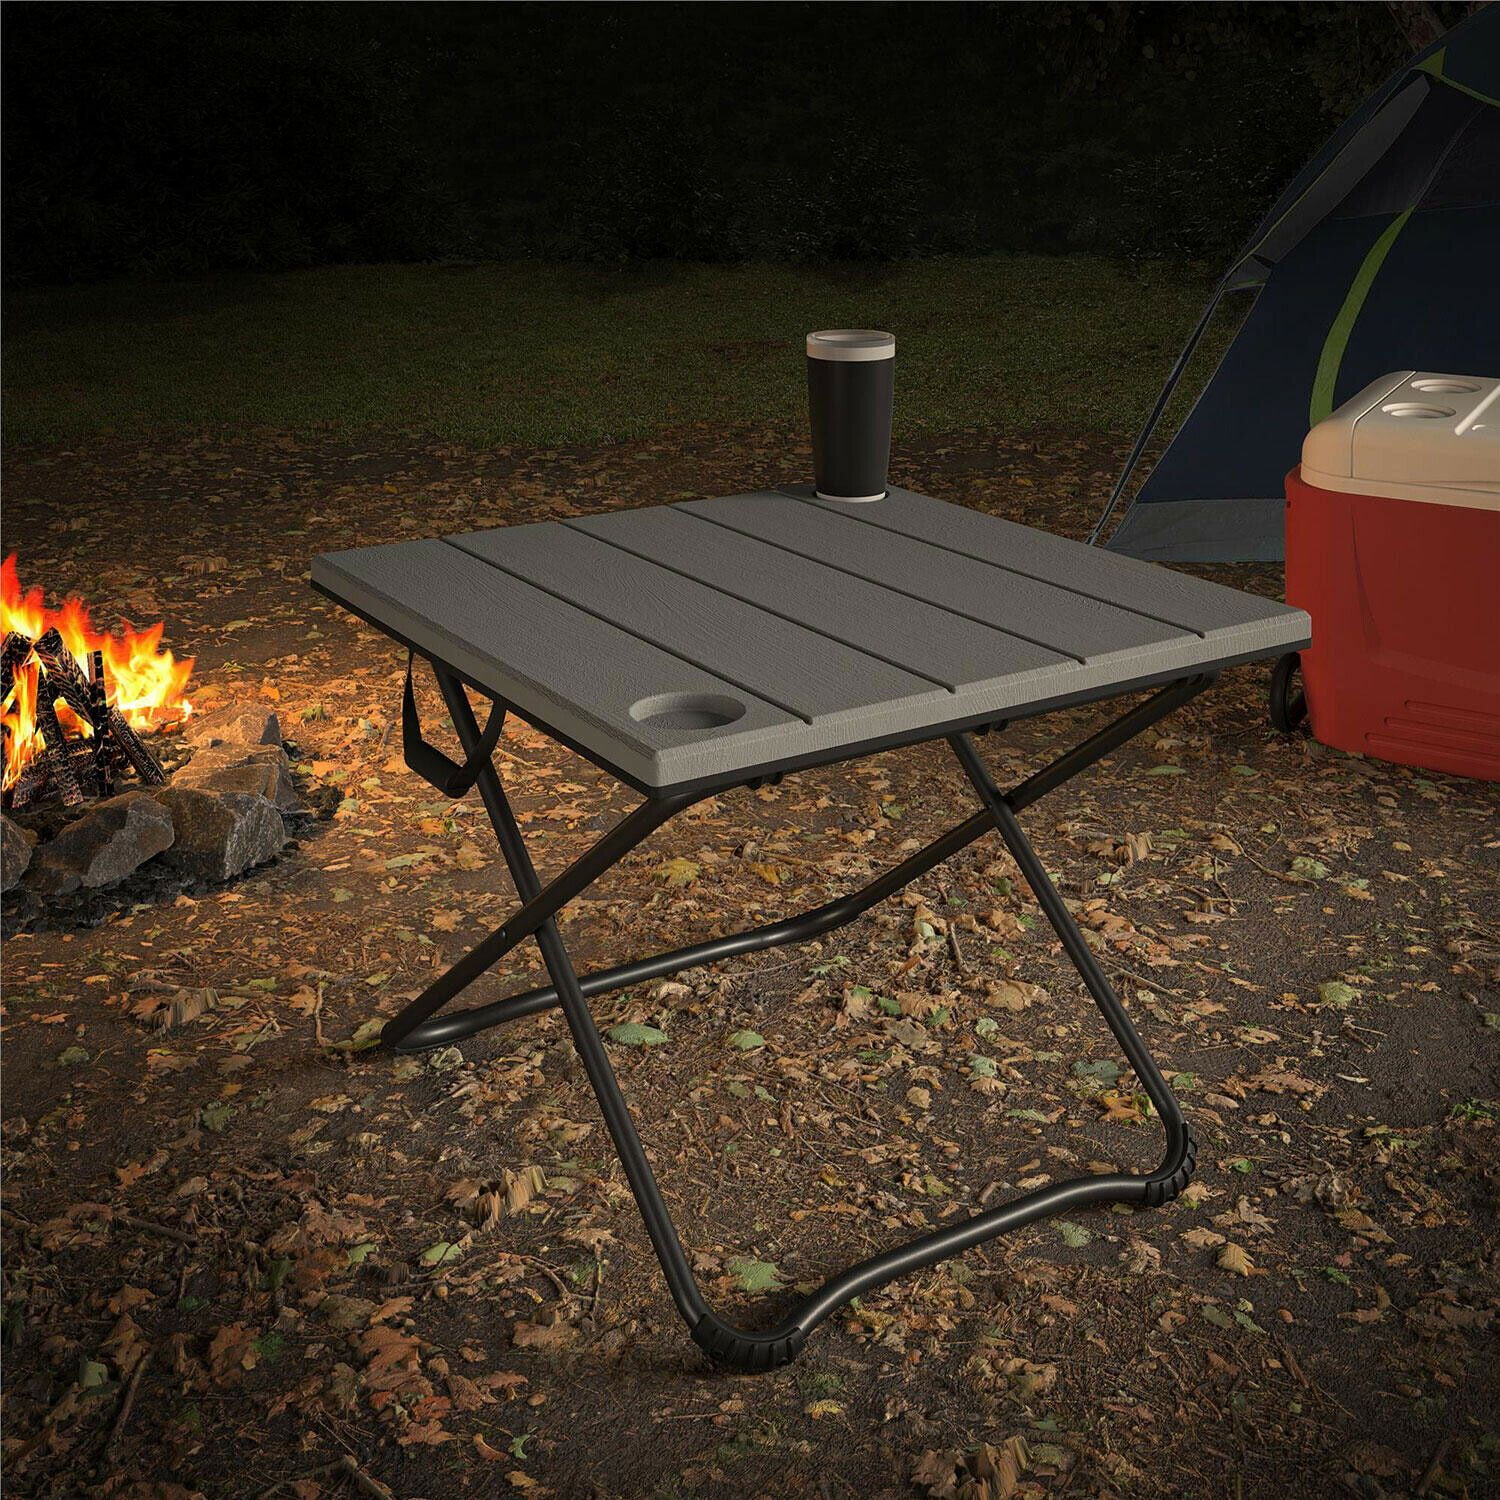 Timber Ridge Folding Table Utility Outdoor Camping Lightweight Desk with Carry Bag and Multi-Function Accessories Brown